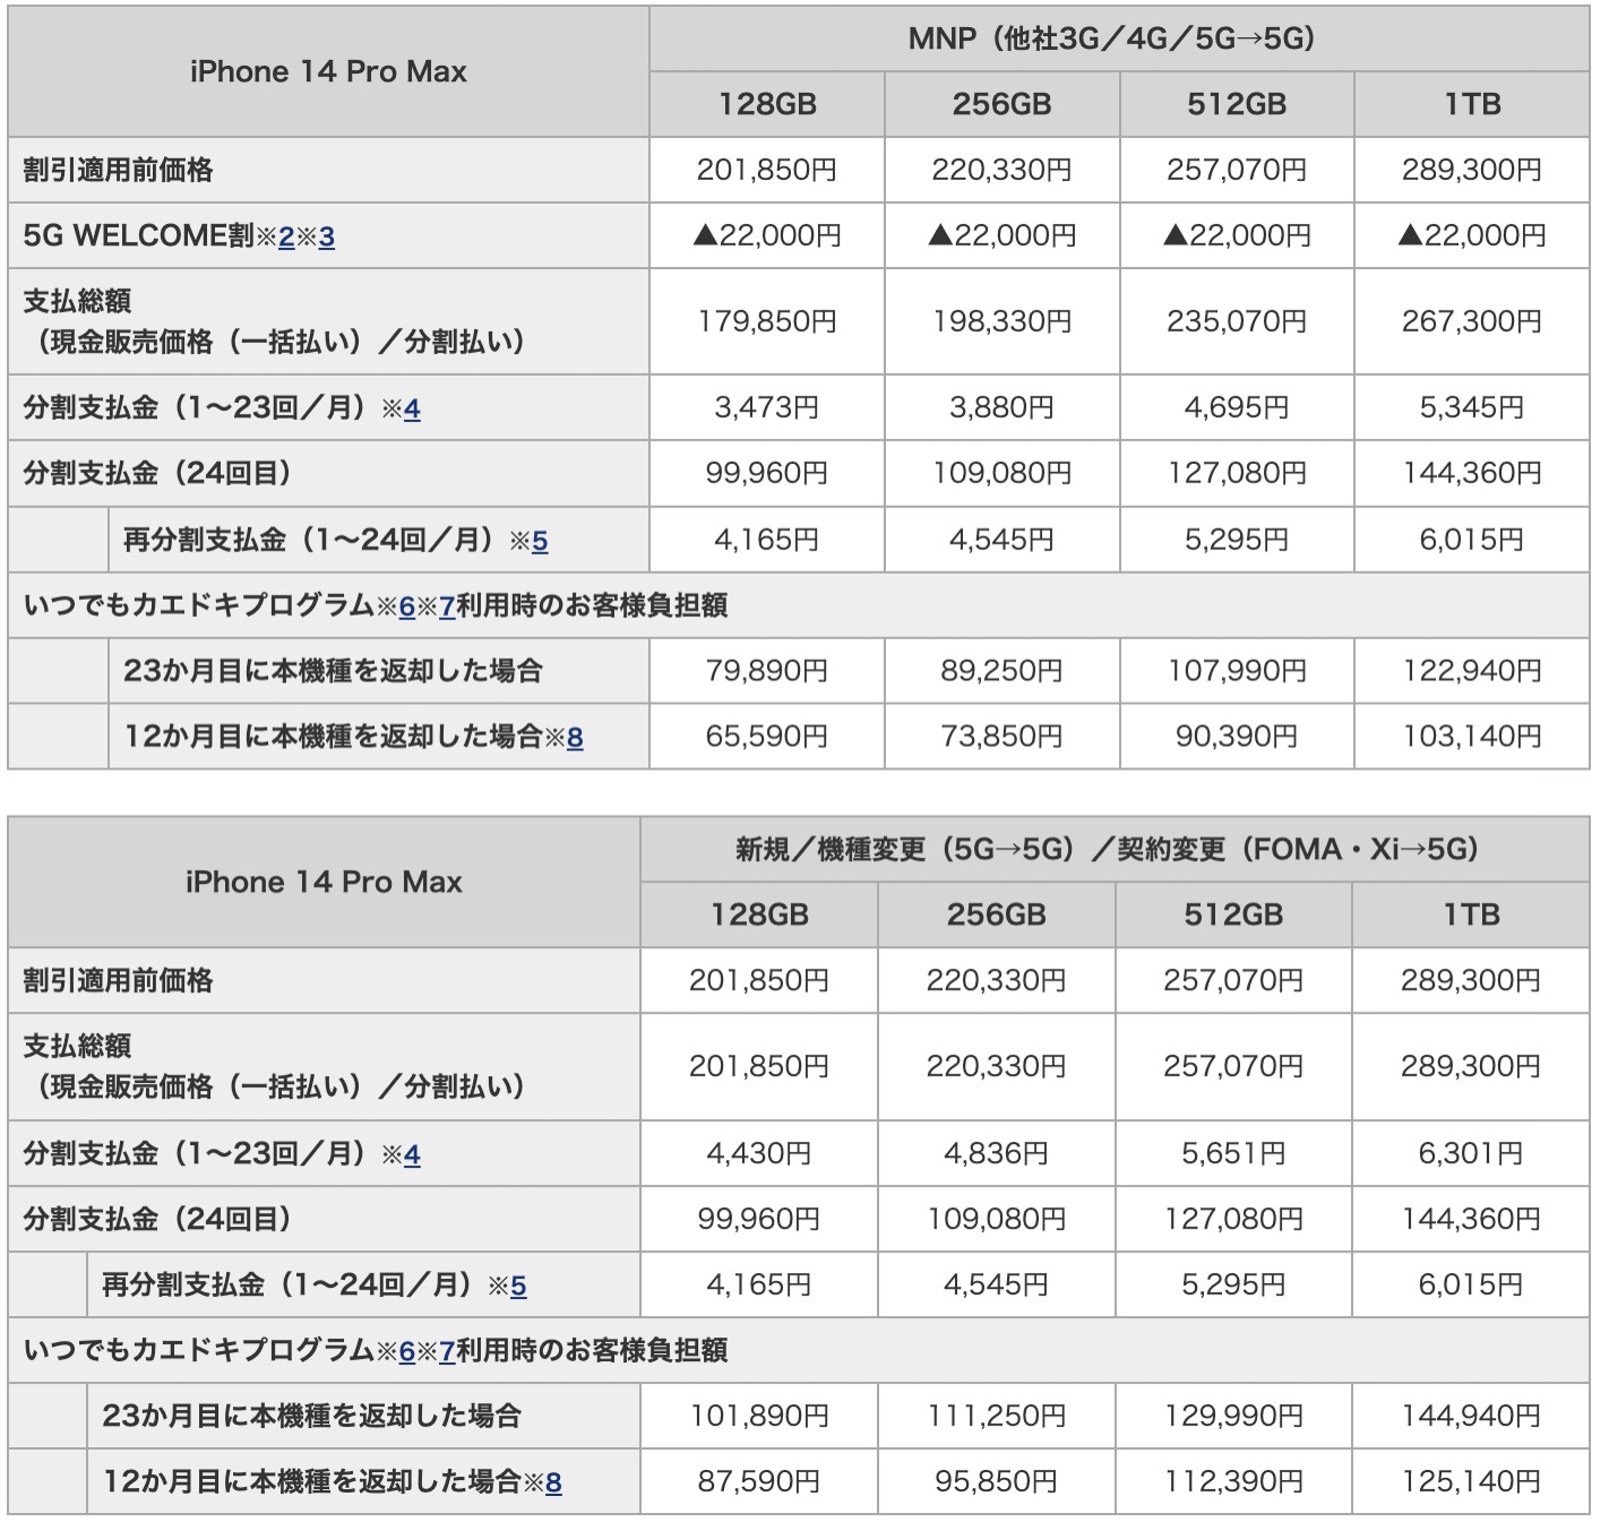 IPhone 14 series pricing for docomo 04